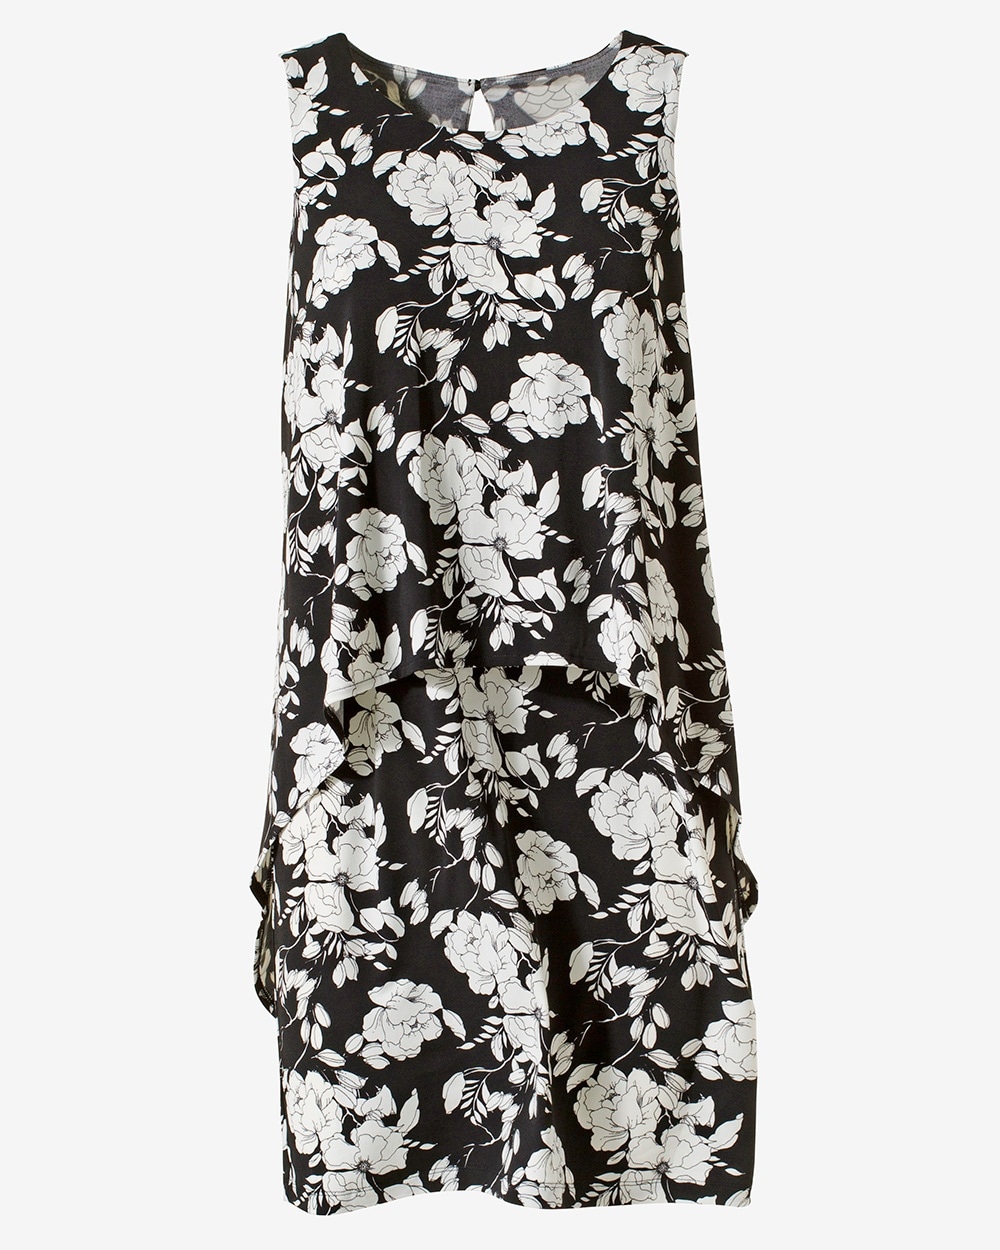 Contemporary Floral Overlay Dress